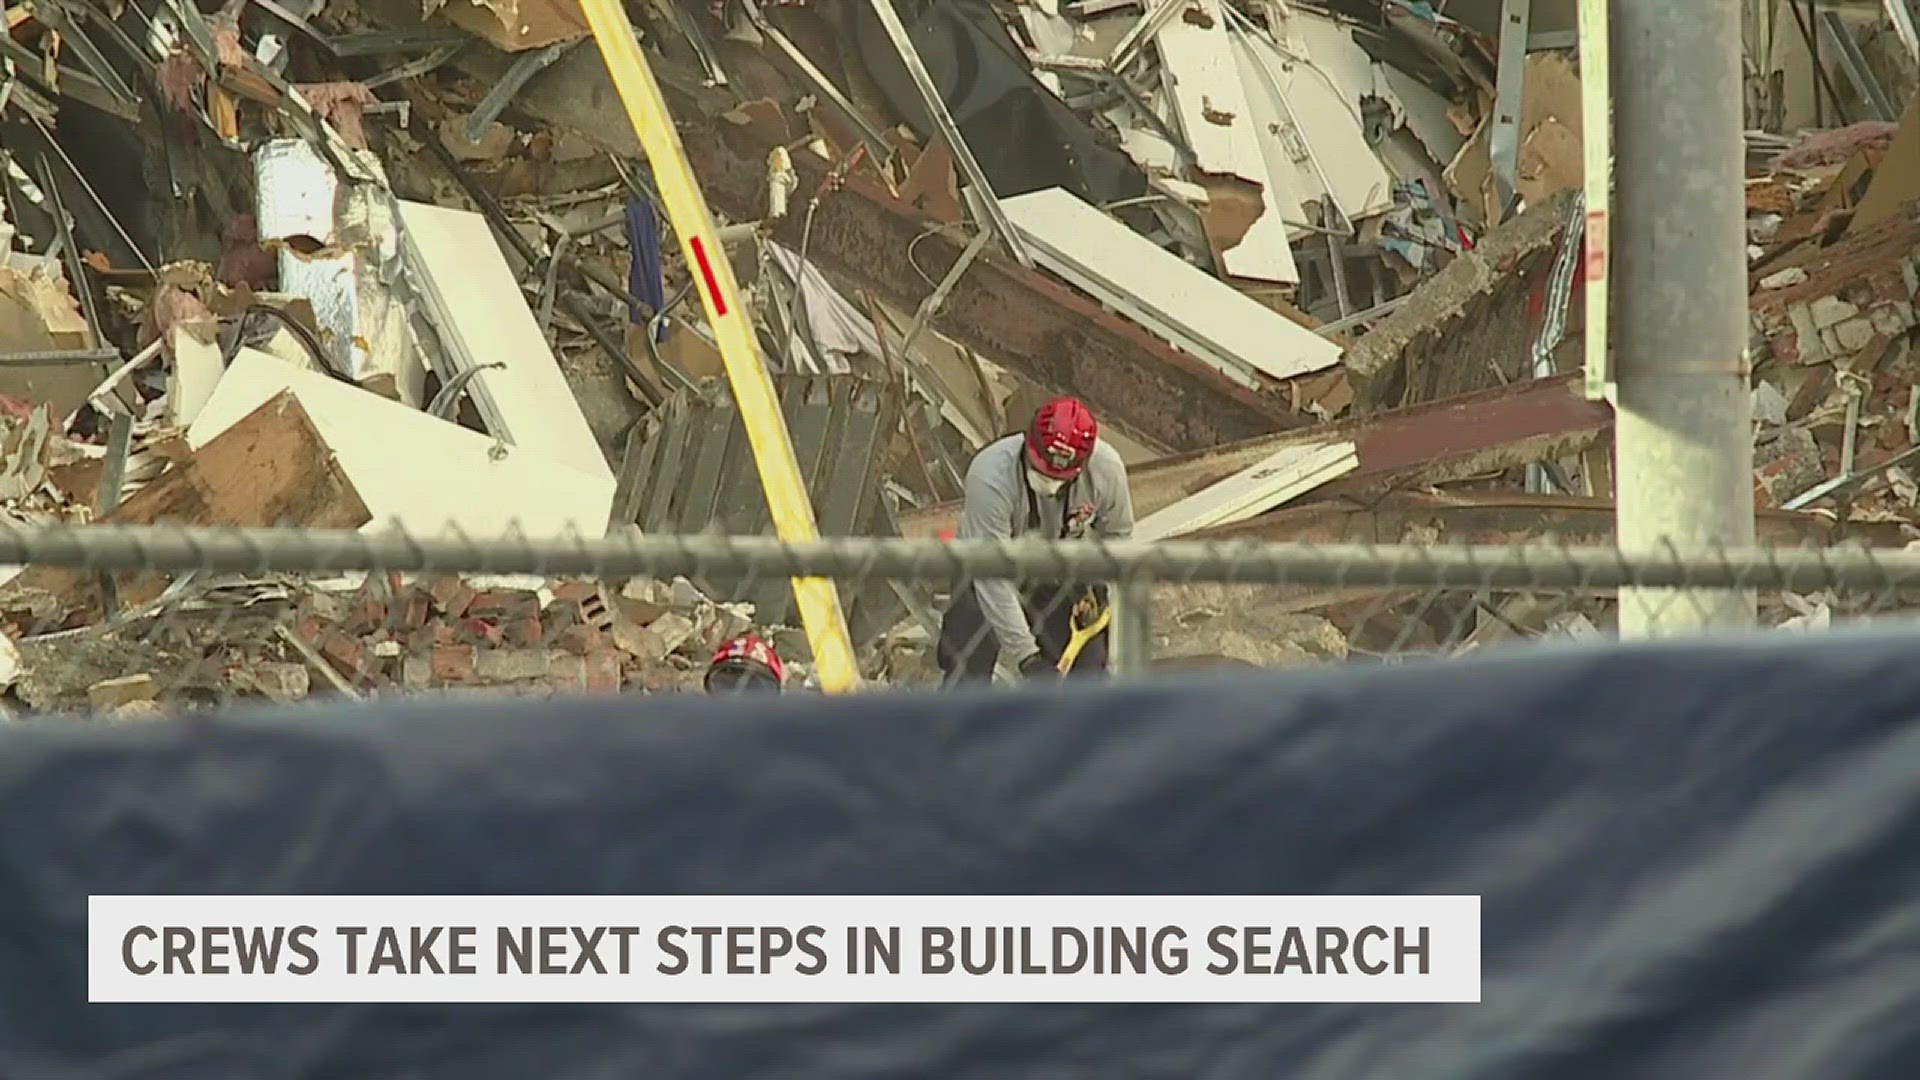 Officials said Friday the building has been unstable and needed to settle before further action could take place.